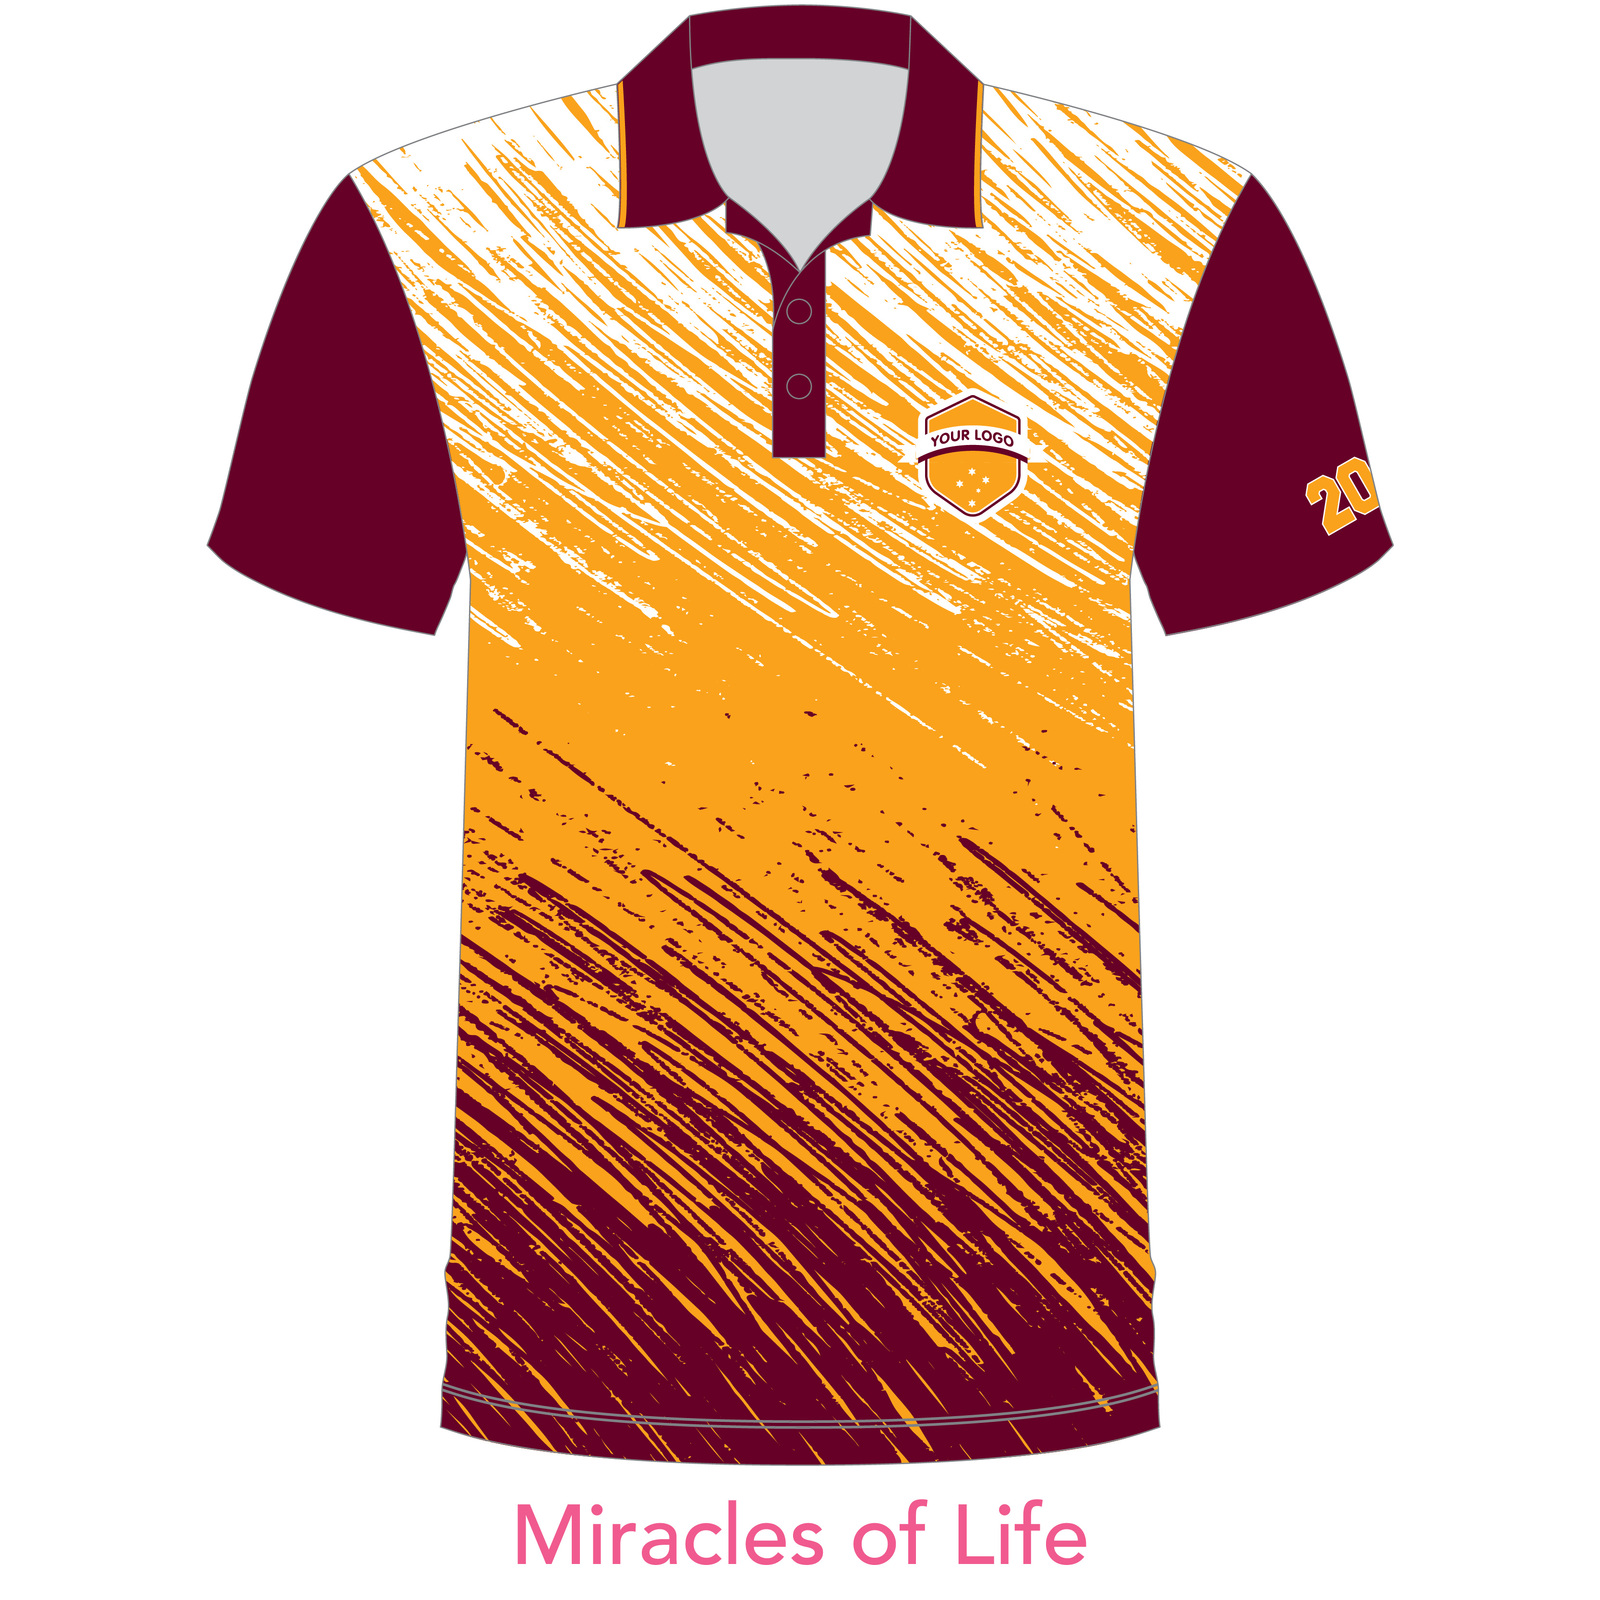 Customised Shirt - Miracles of Life